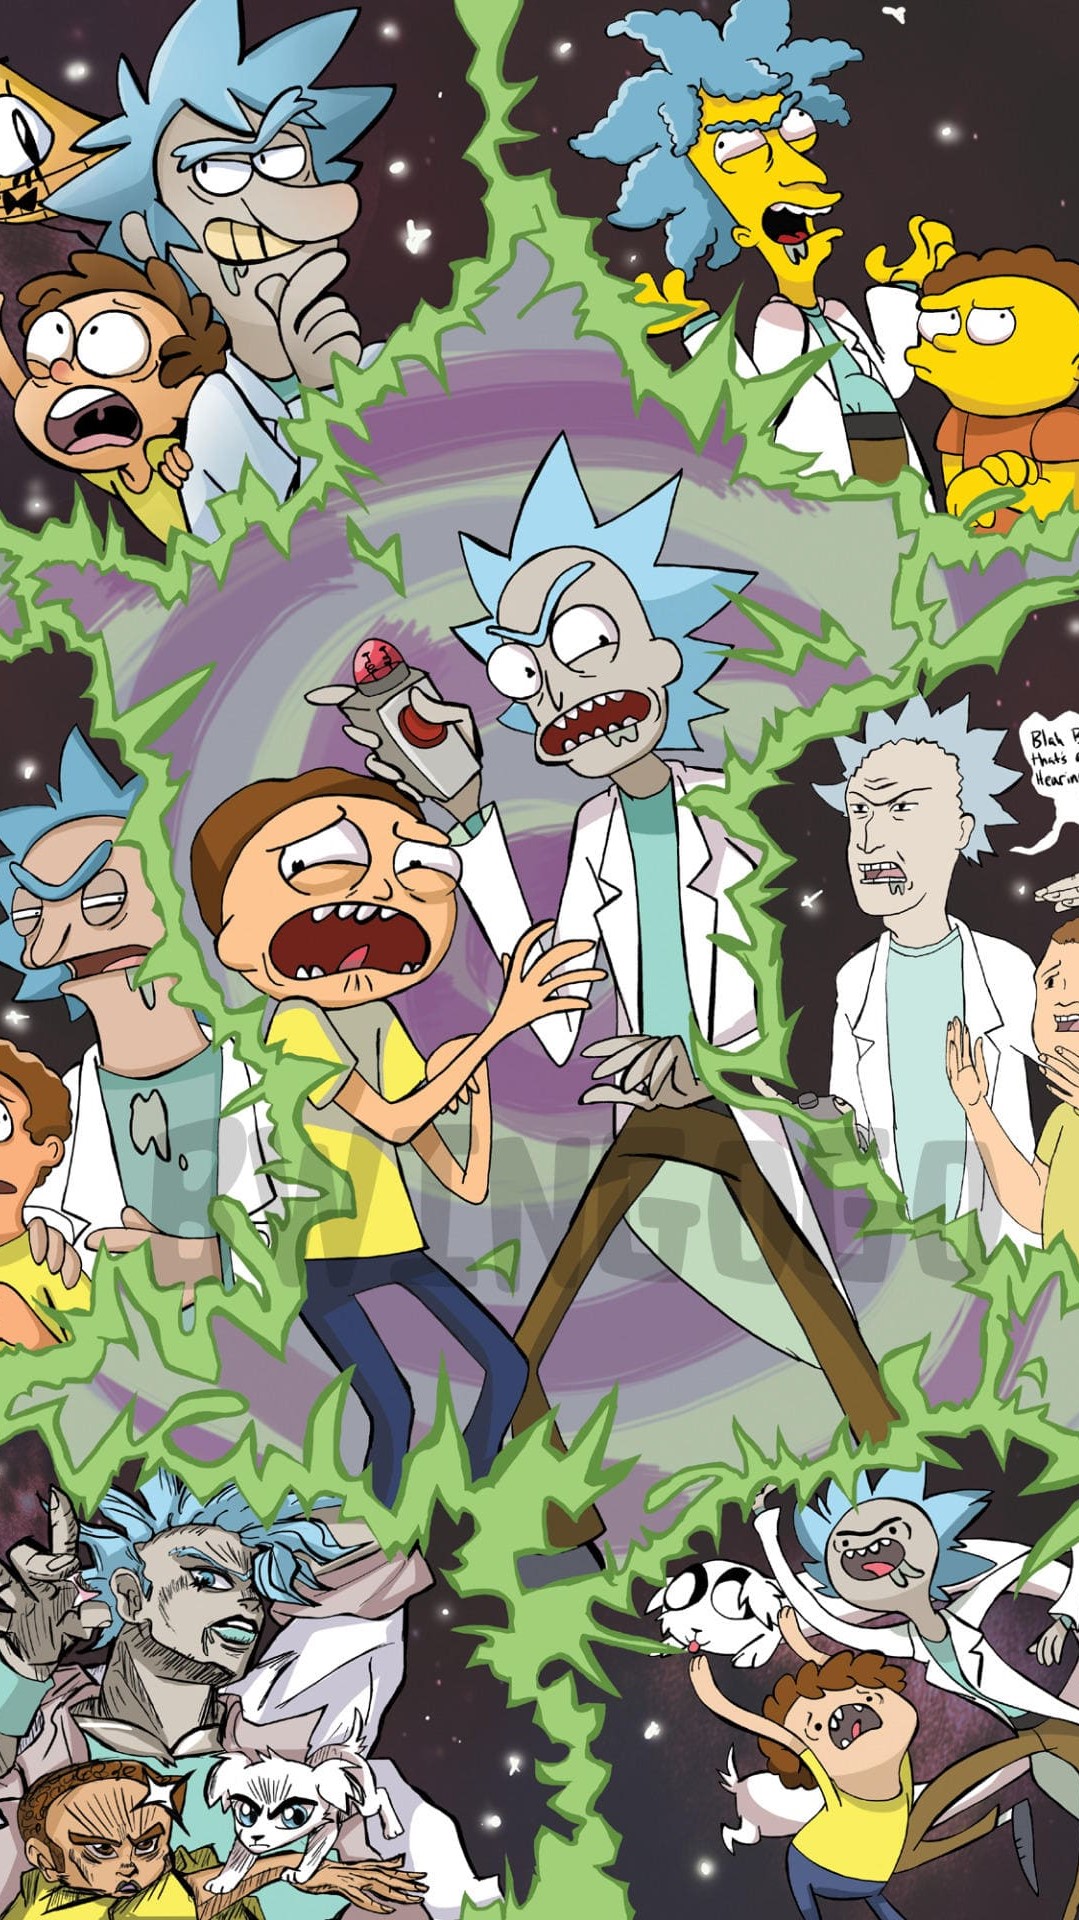 Rick and Morty Season 5 Wallpapers - Top 30 Best Rick and Morty S5  Backgrounds